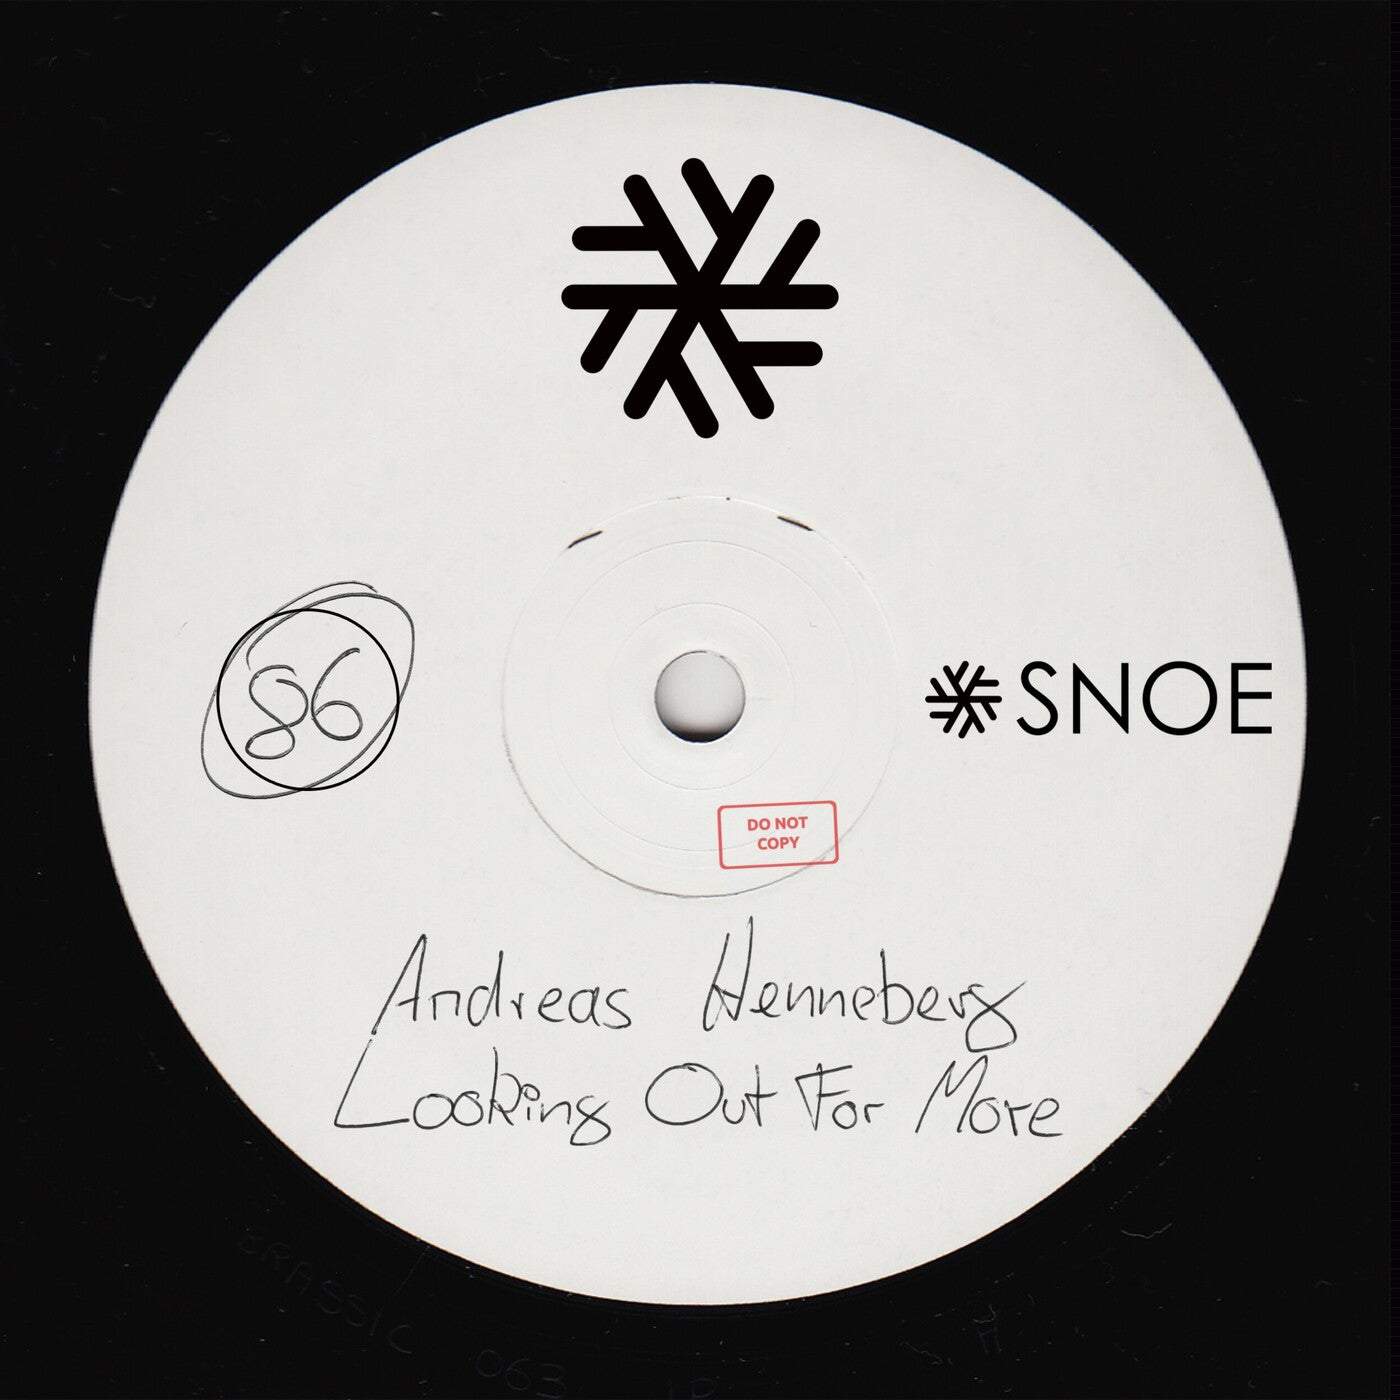 image cover: Andreas Henneberg - Looking out for More on SNOE